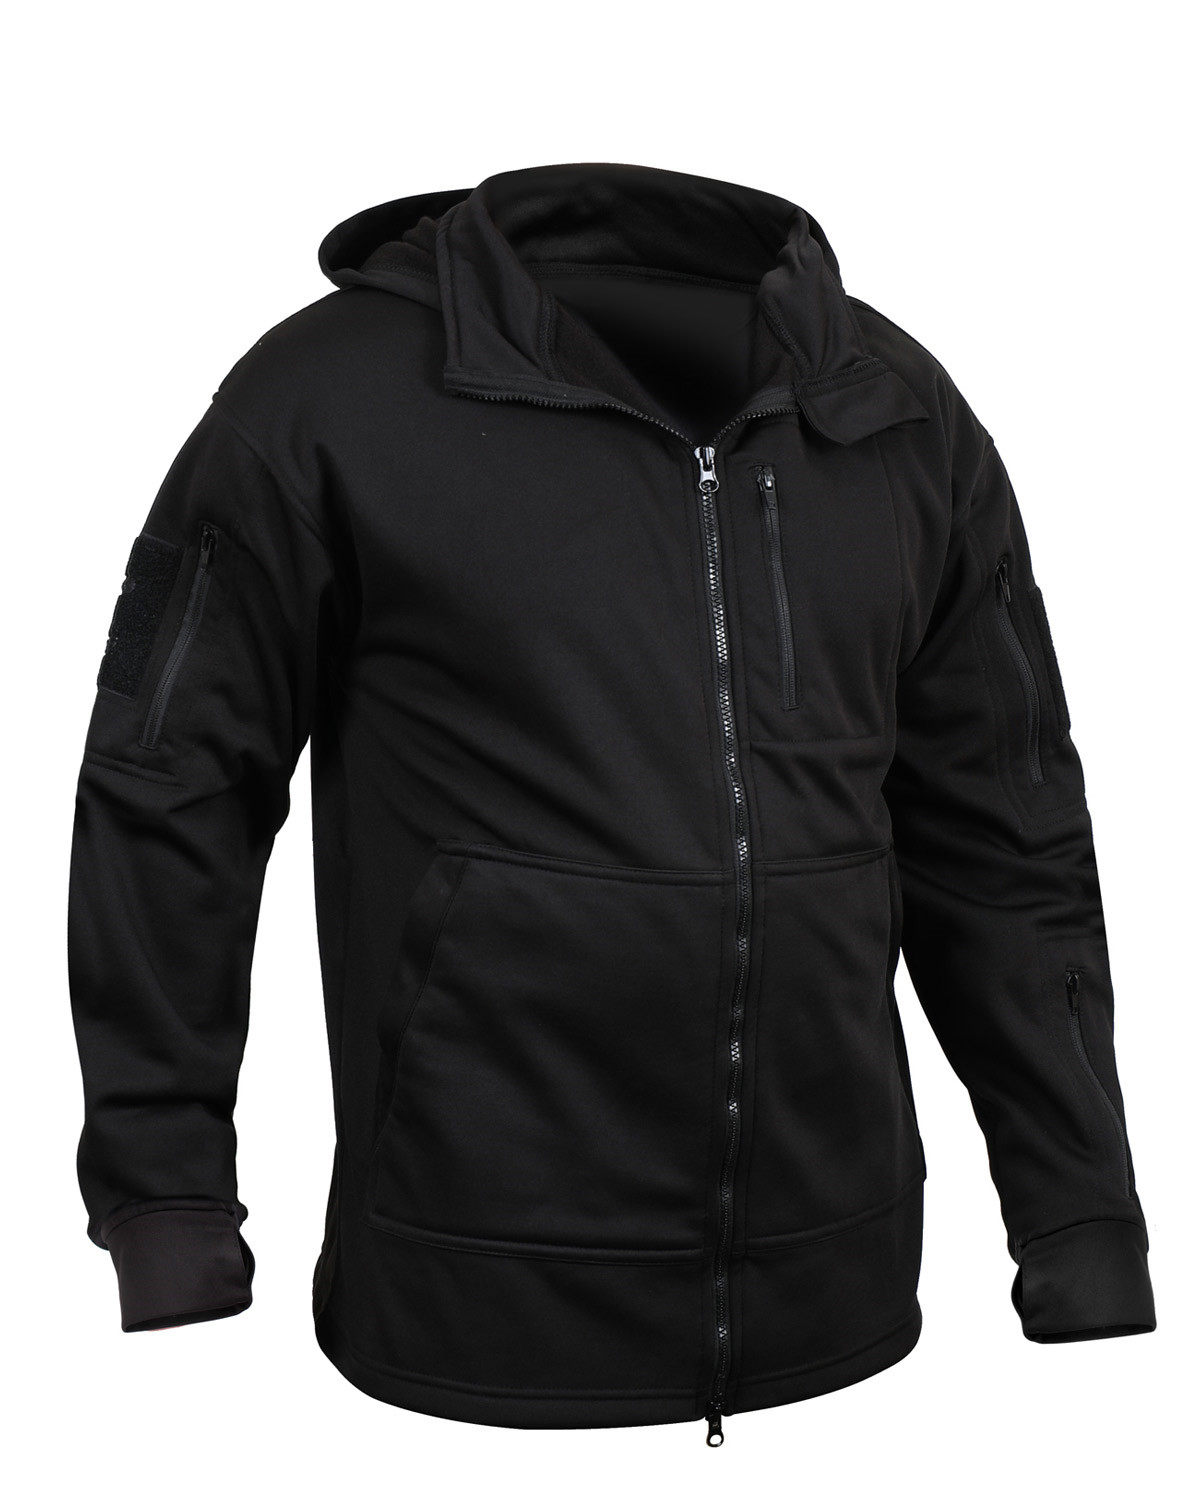 Buy Rothco Tactical Hoodie w. Zip | Money Back Guarantee | ARMY STAR